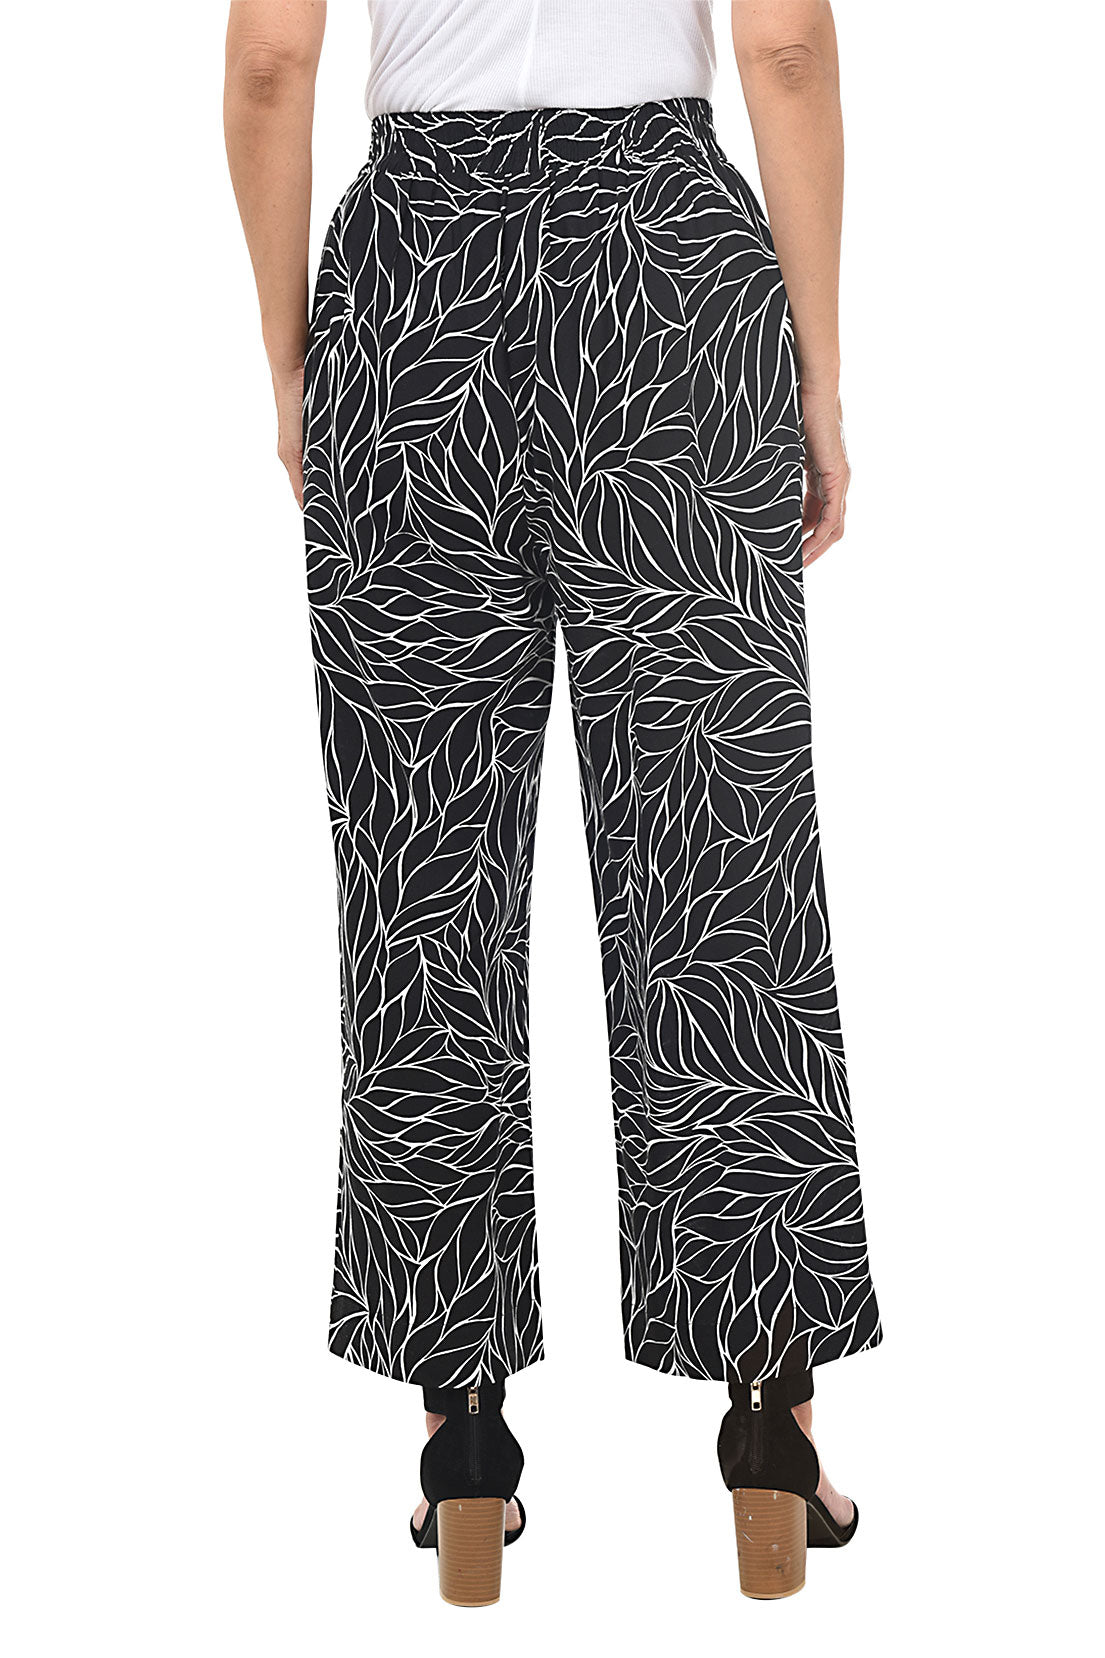 Blakely Leaves Pull-On Palazzo Pant